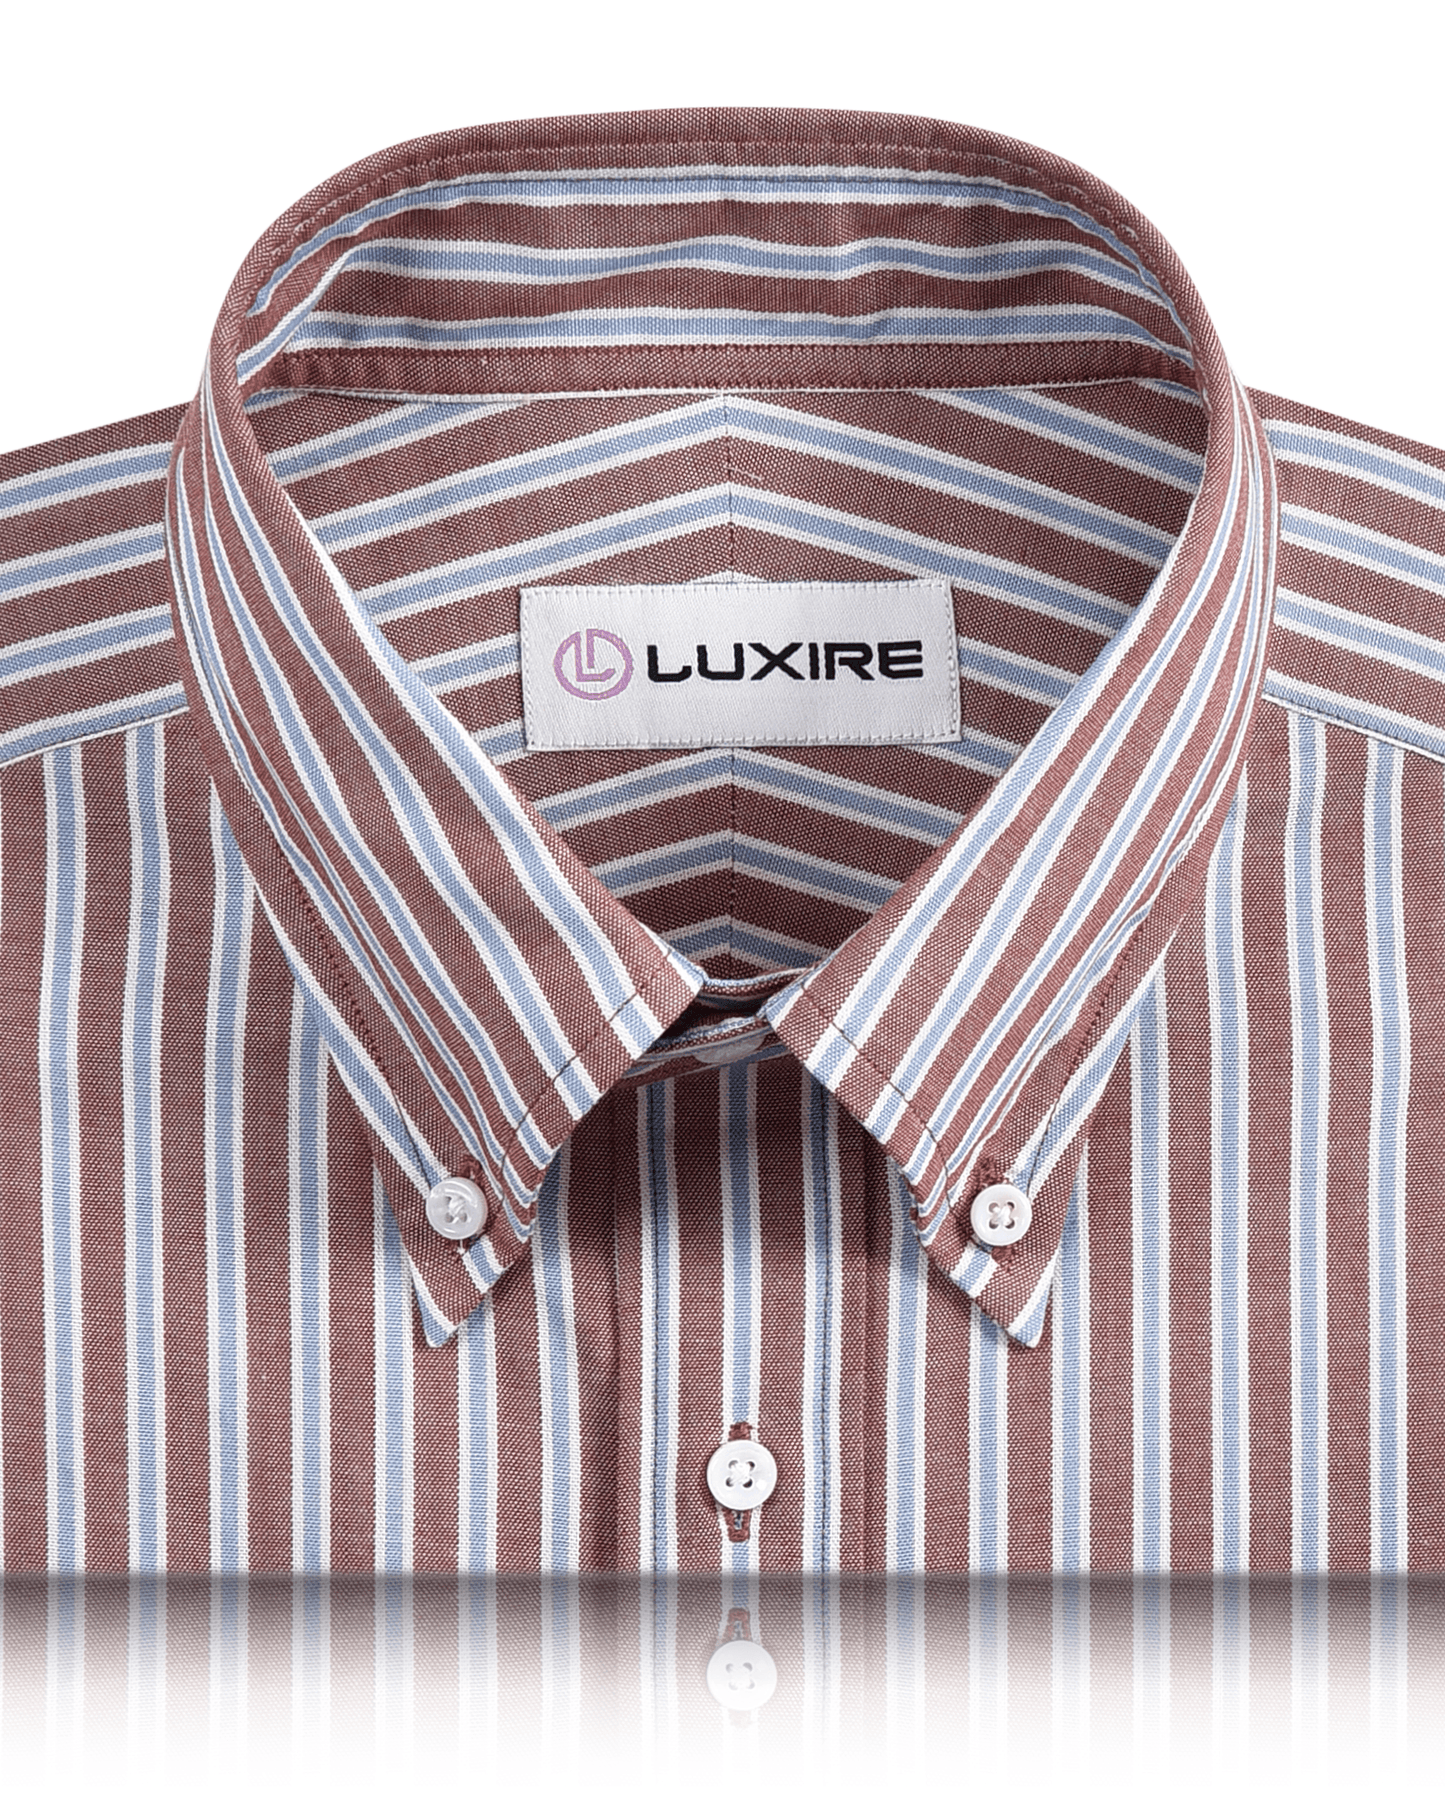 Collar of the custom oxford shirt for men by Luxire with blue white and rust stripes